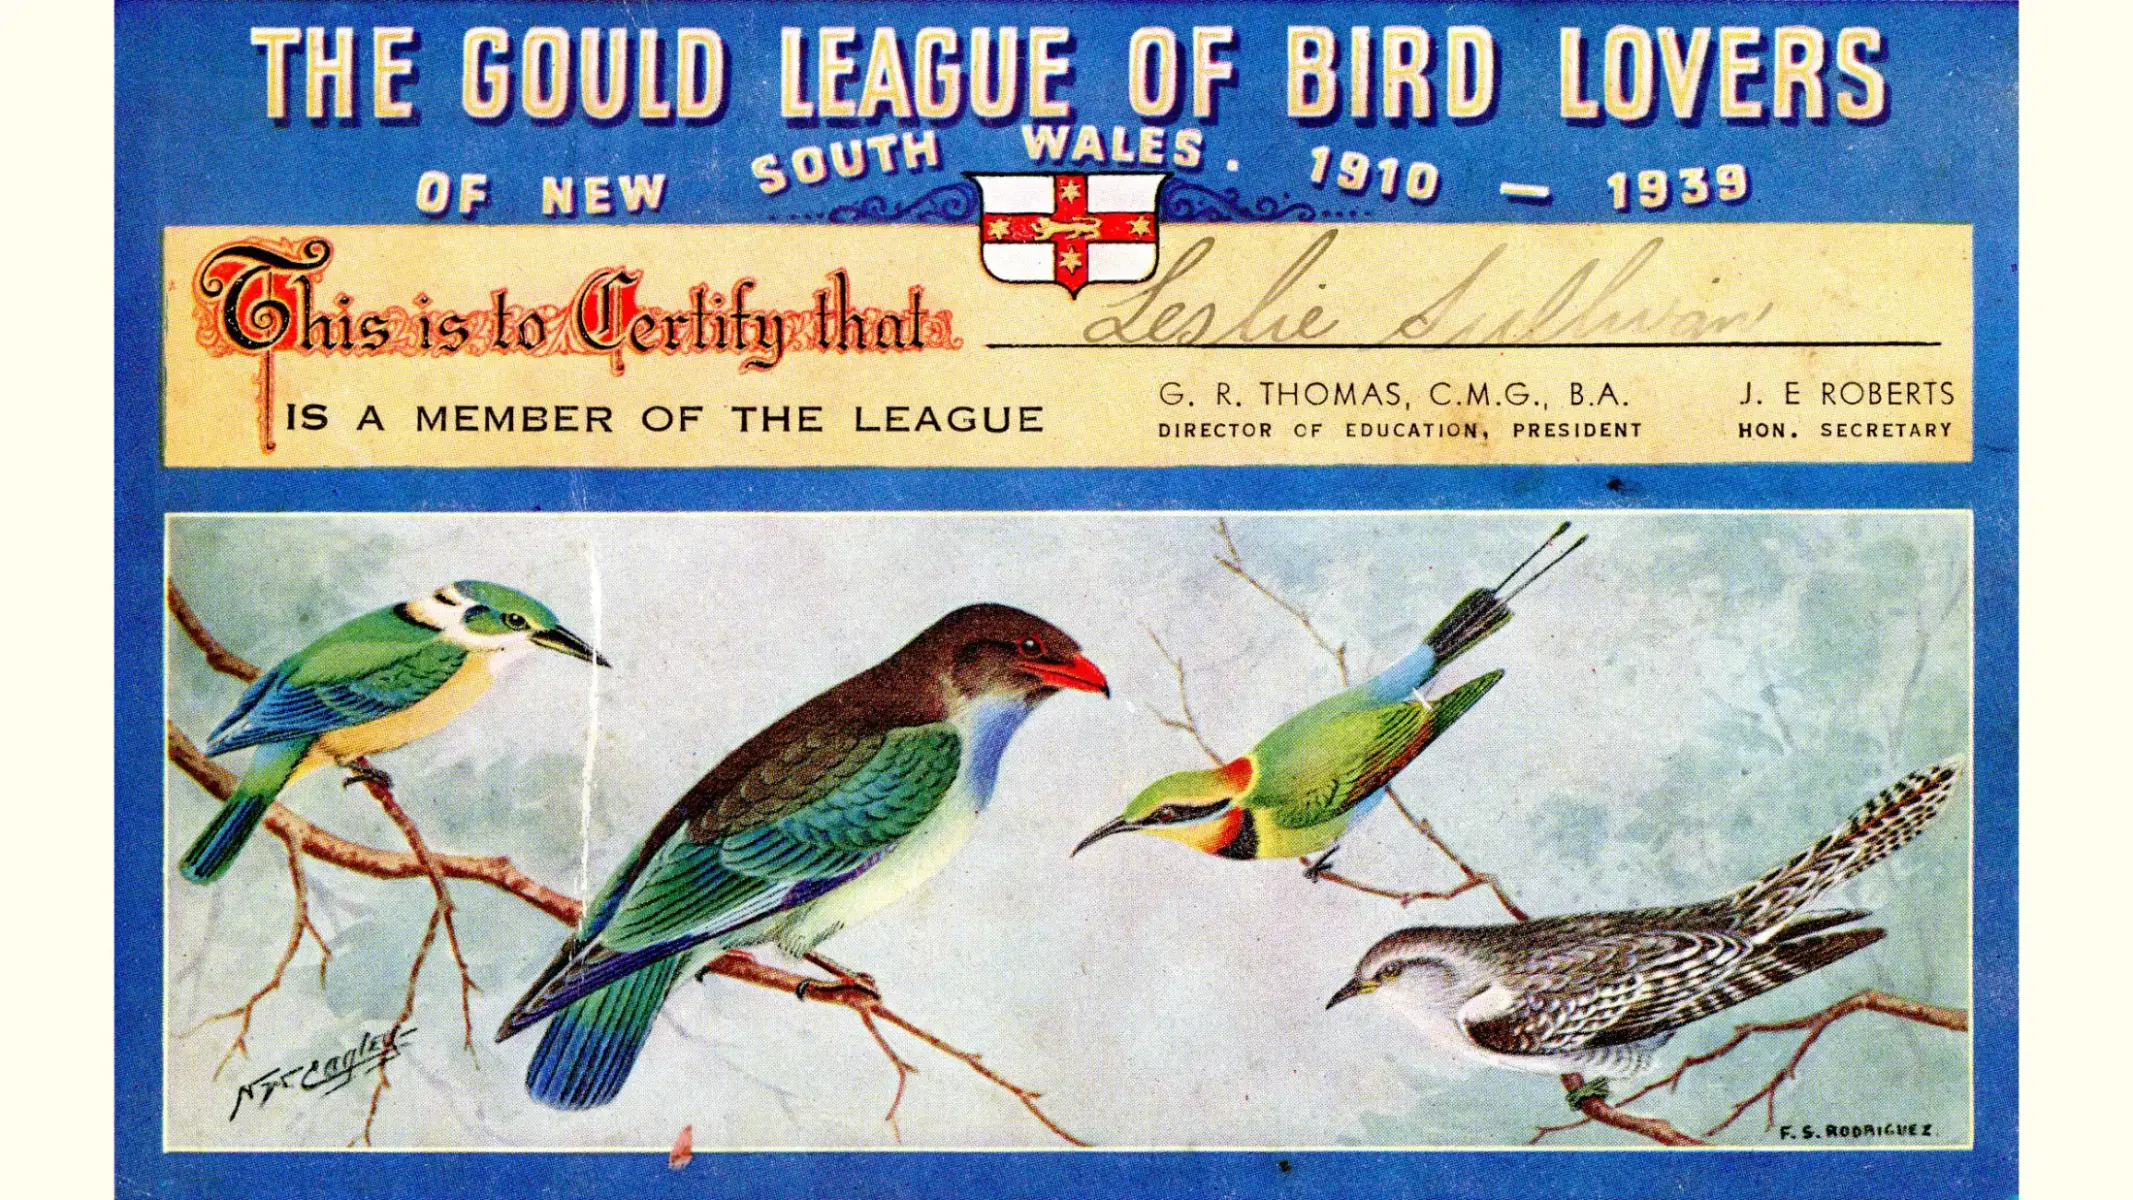 By 1935 the Gould Leagues had over one million student members! The League provided materials and activities for schools. Its goal was to inspire children (and adults!) to appreciate nature as they learned and observed. Would you join a club like the Gould League?